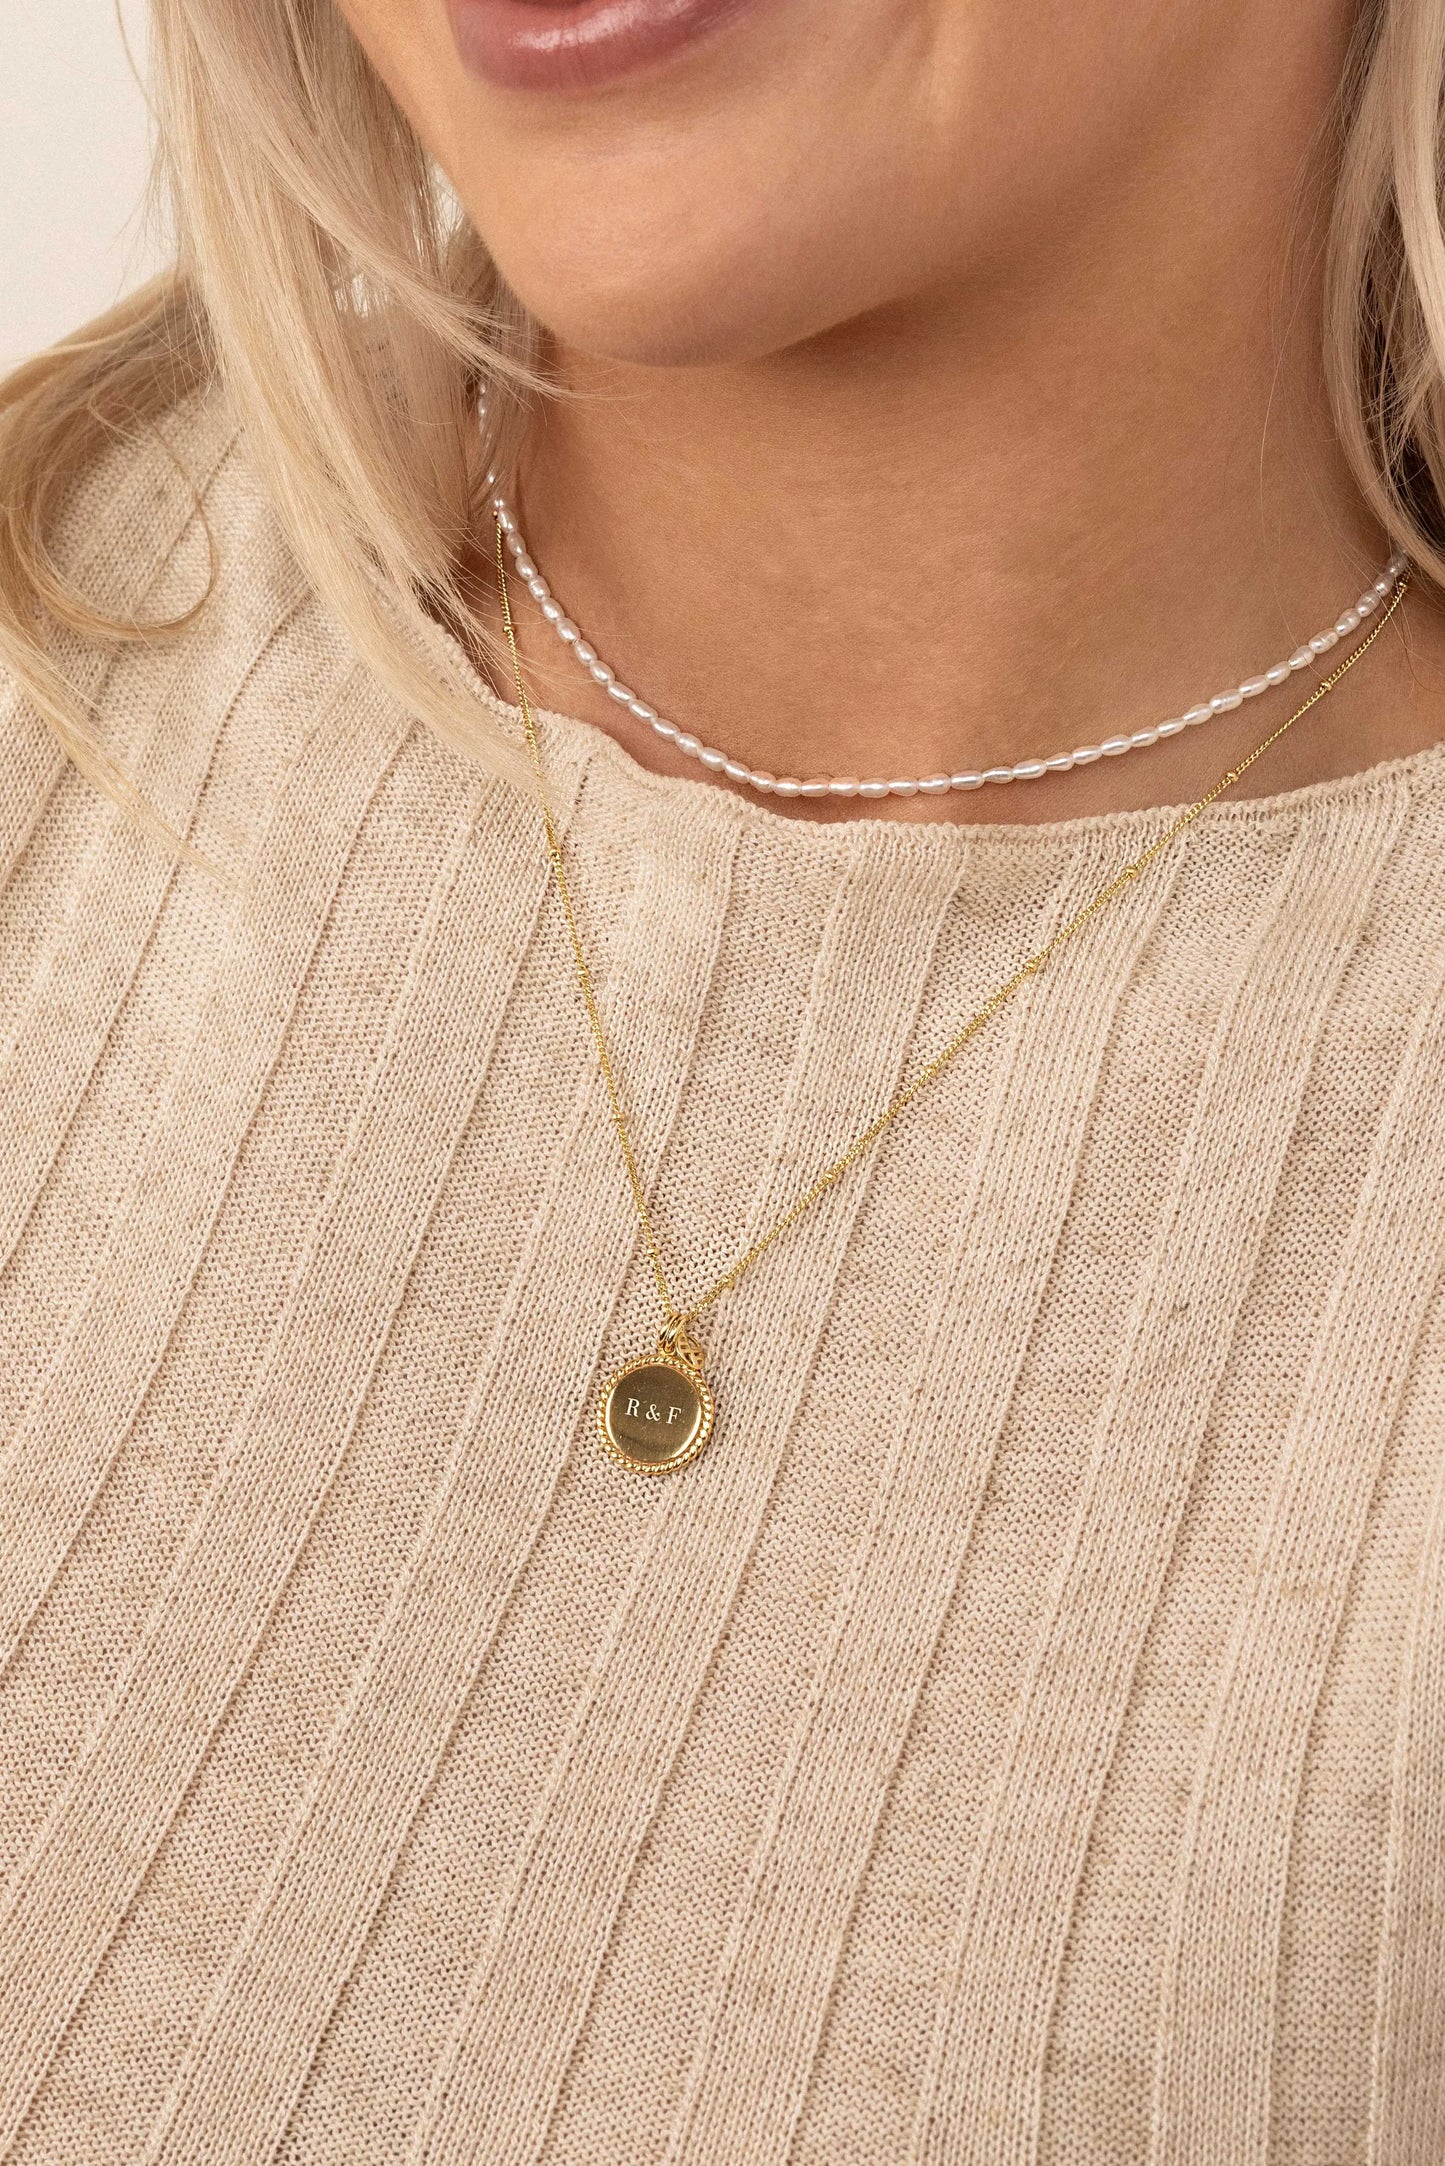 The    Etch Rope Necklace by  Francesca Jewellery from the Necklaces Collection.